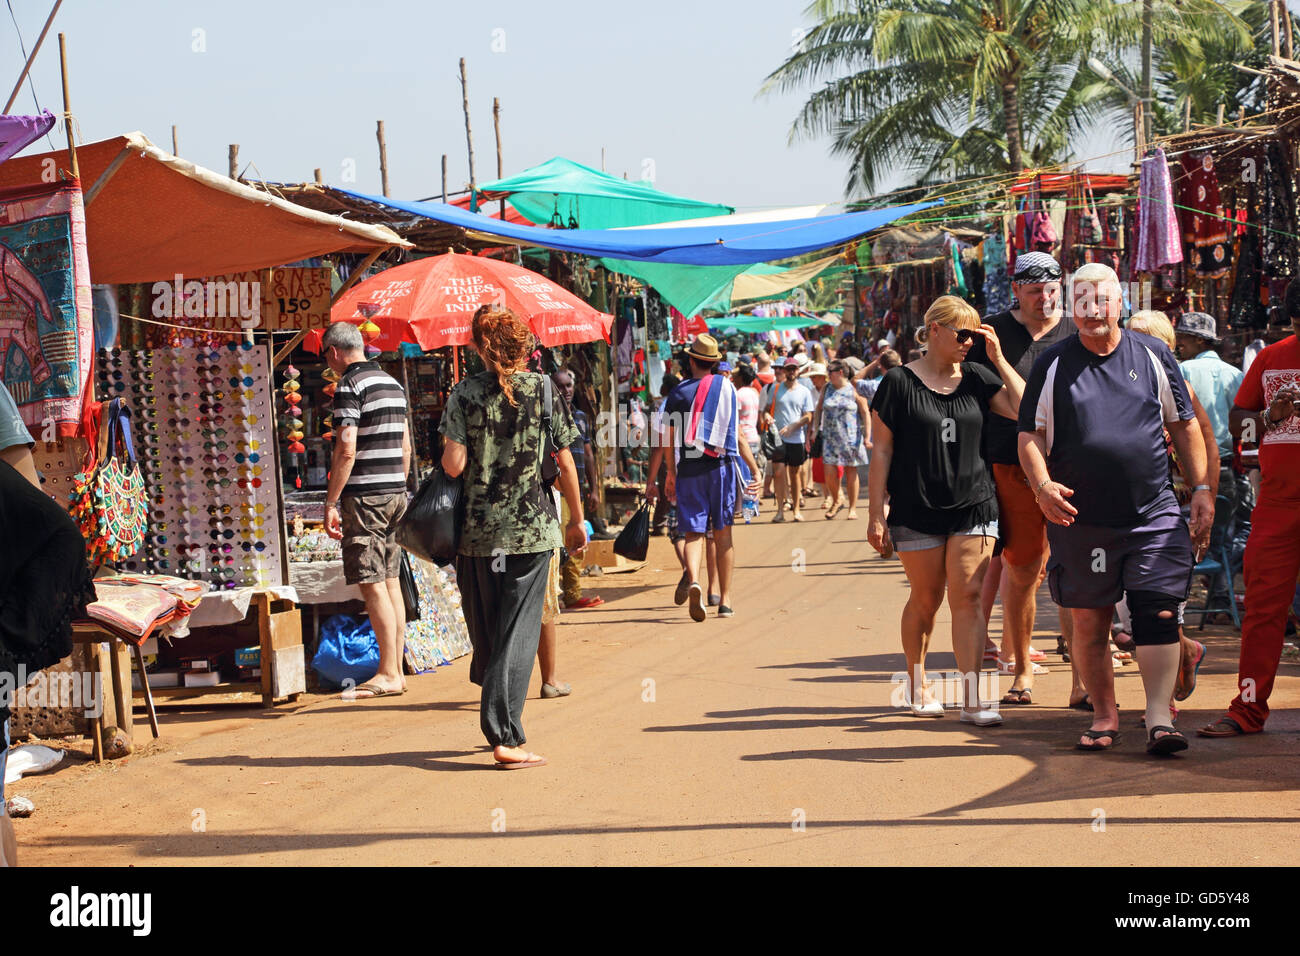 Shoppers at the Wednesday flea market in Anjuna Beach, Goa, India, looking for varieties of merchandise. Stock Photo